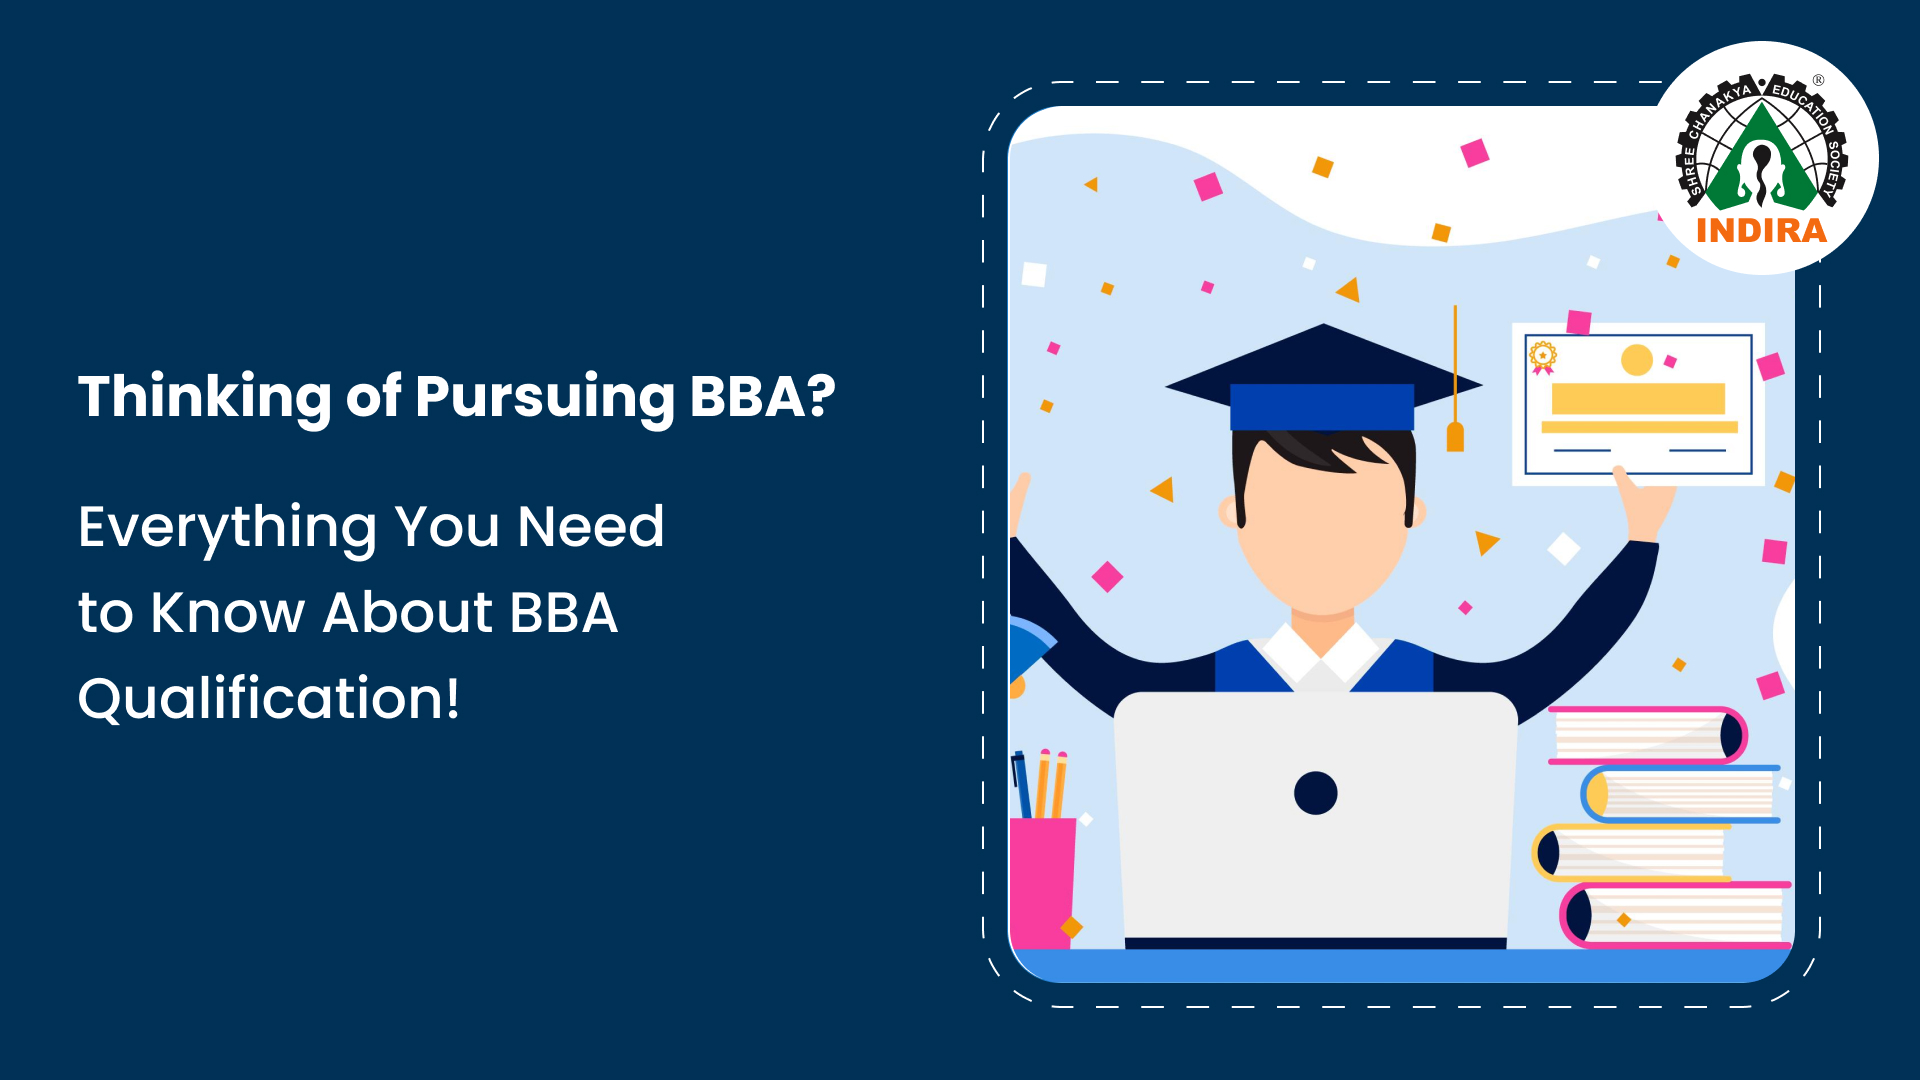  Thinking of Pursuing BBA? Everything You Need to Know About BBA Qualification!